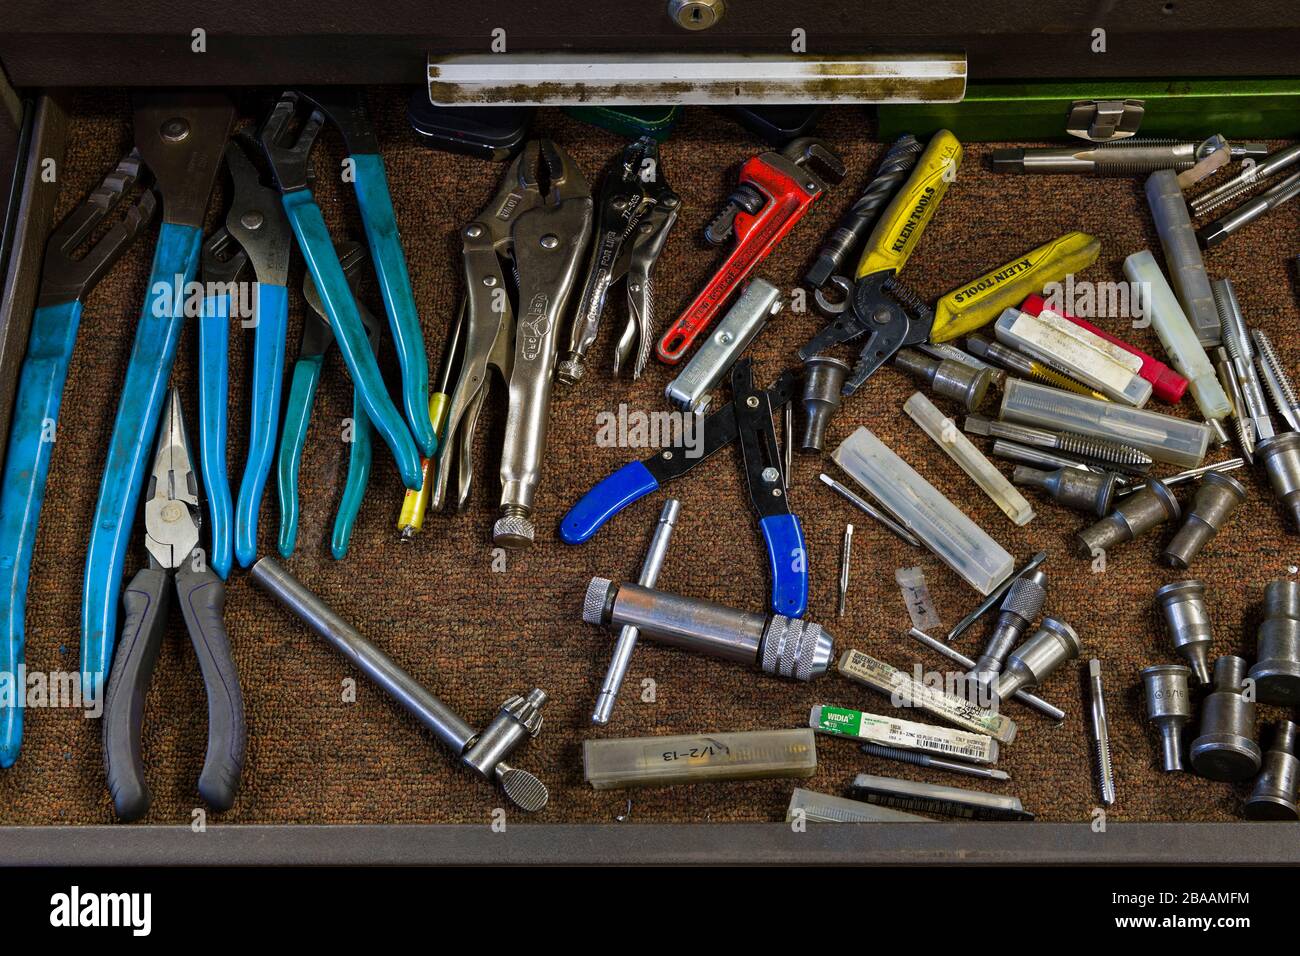 An open toolbox drawer filled with various handtools Stock Photo